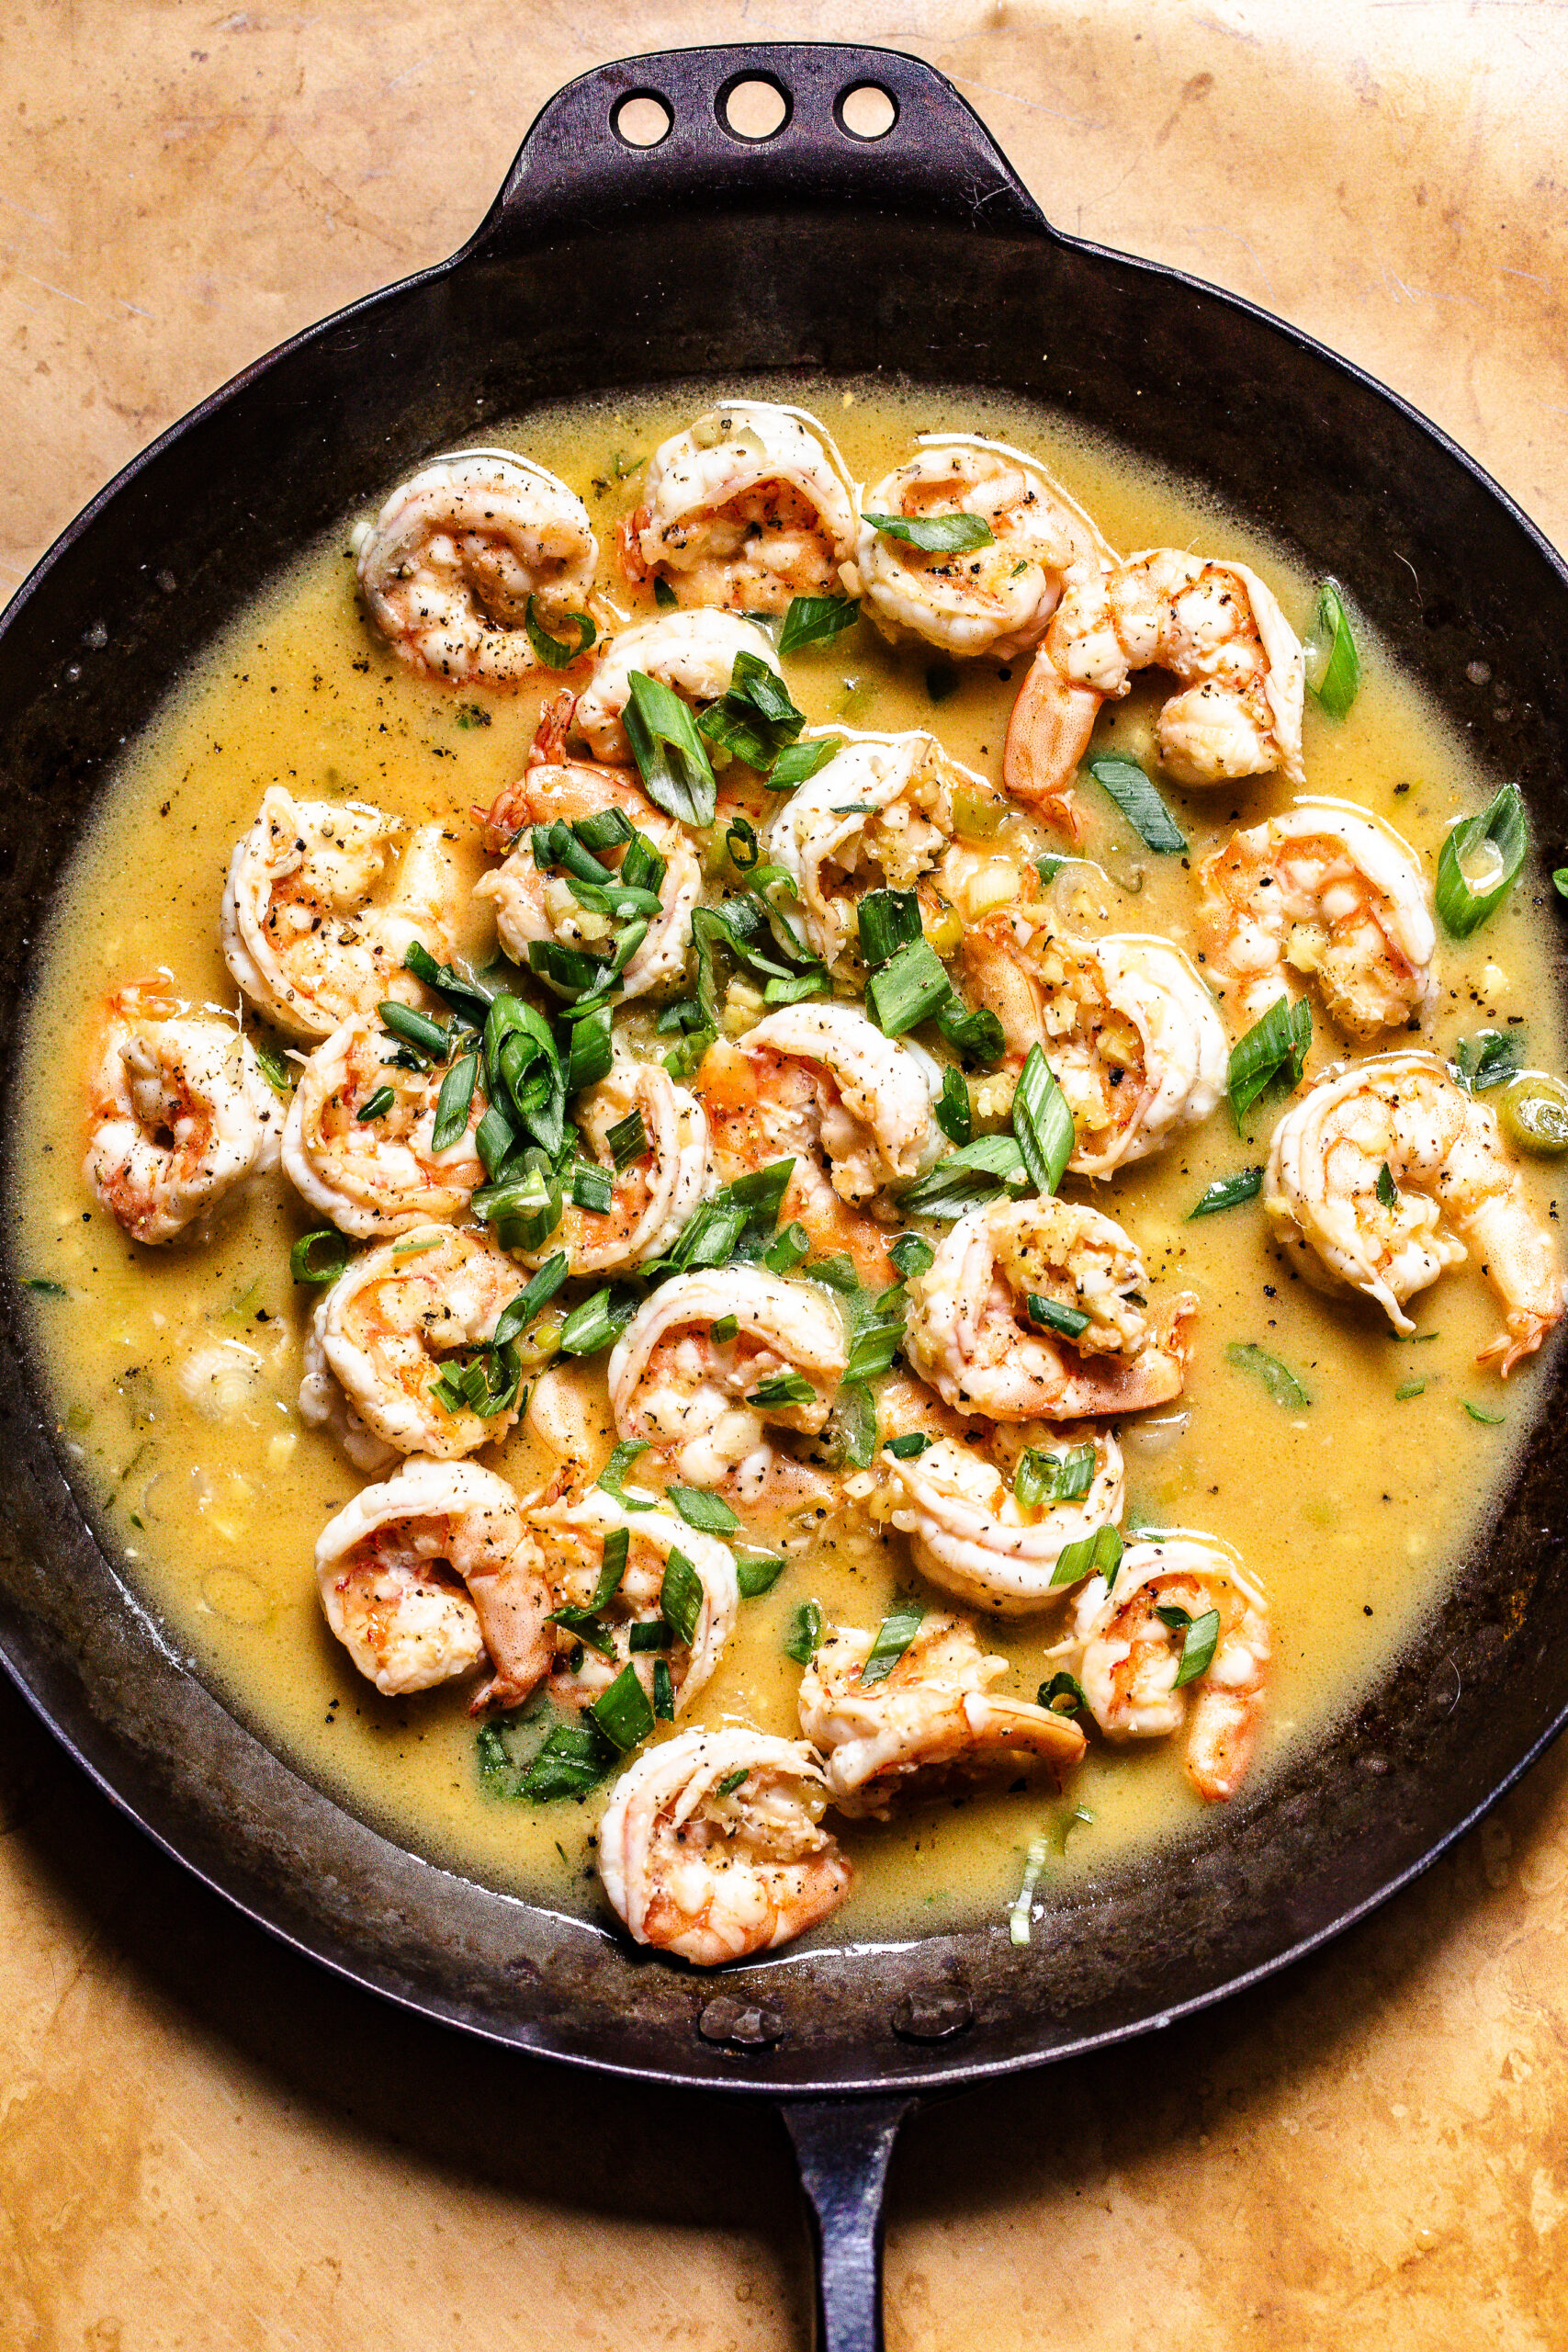 Saucy Citrus Shrimp with Garlic and Ginger